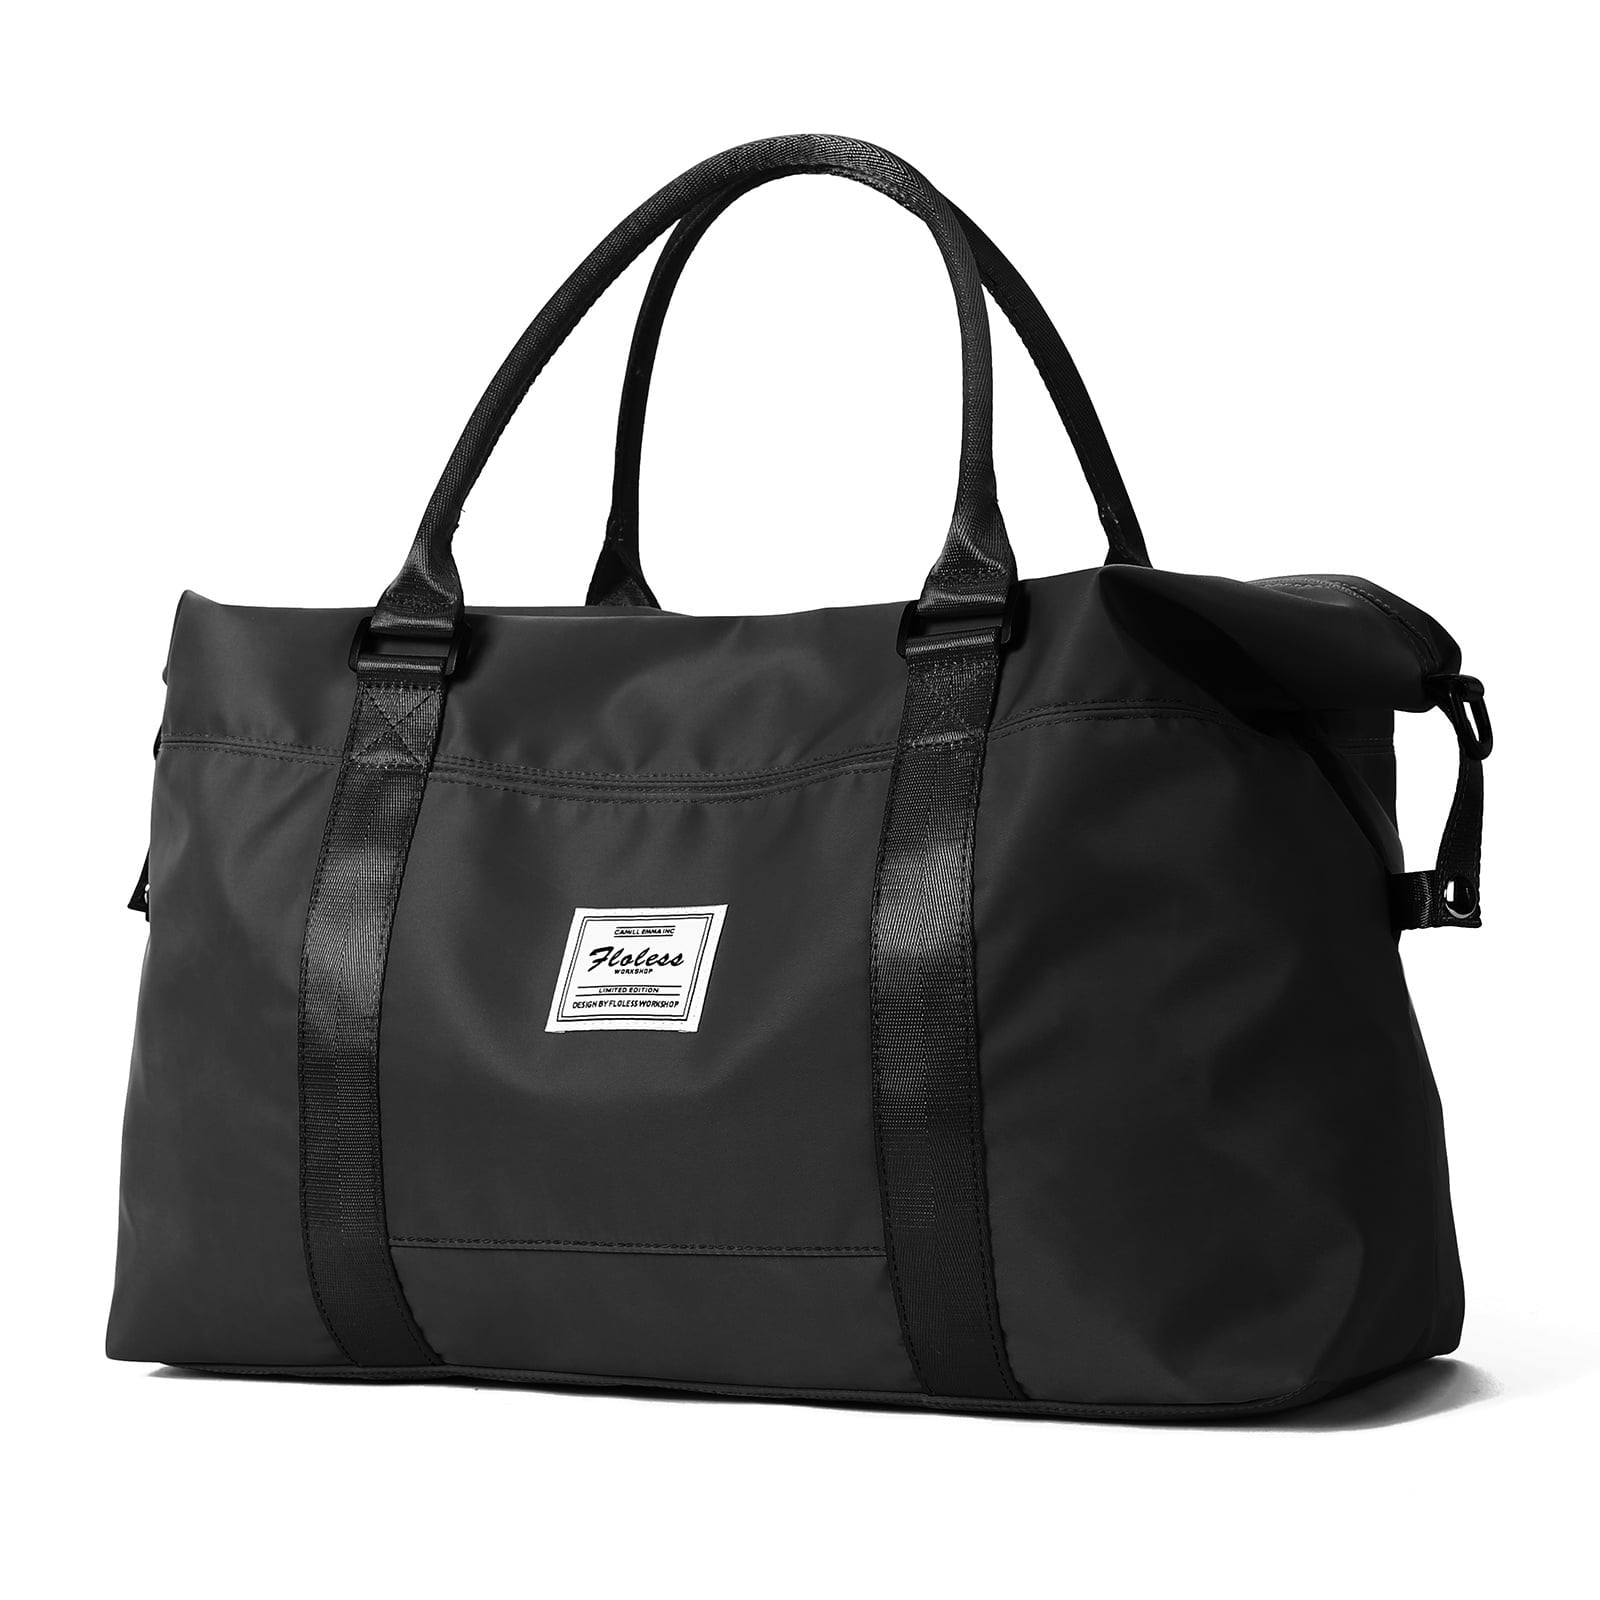 Sports Gym Bag Men Canvas Luggage Handbag Large Travel Duffle Bag For Women  Yoga Weekend Beach Blosa For Men Gym Accessories Q0705 From Yanqin10,  $26.92